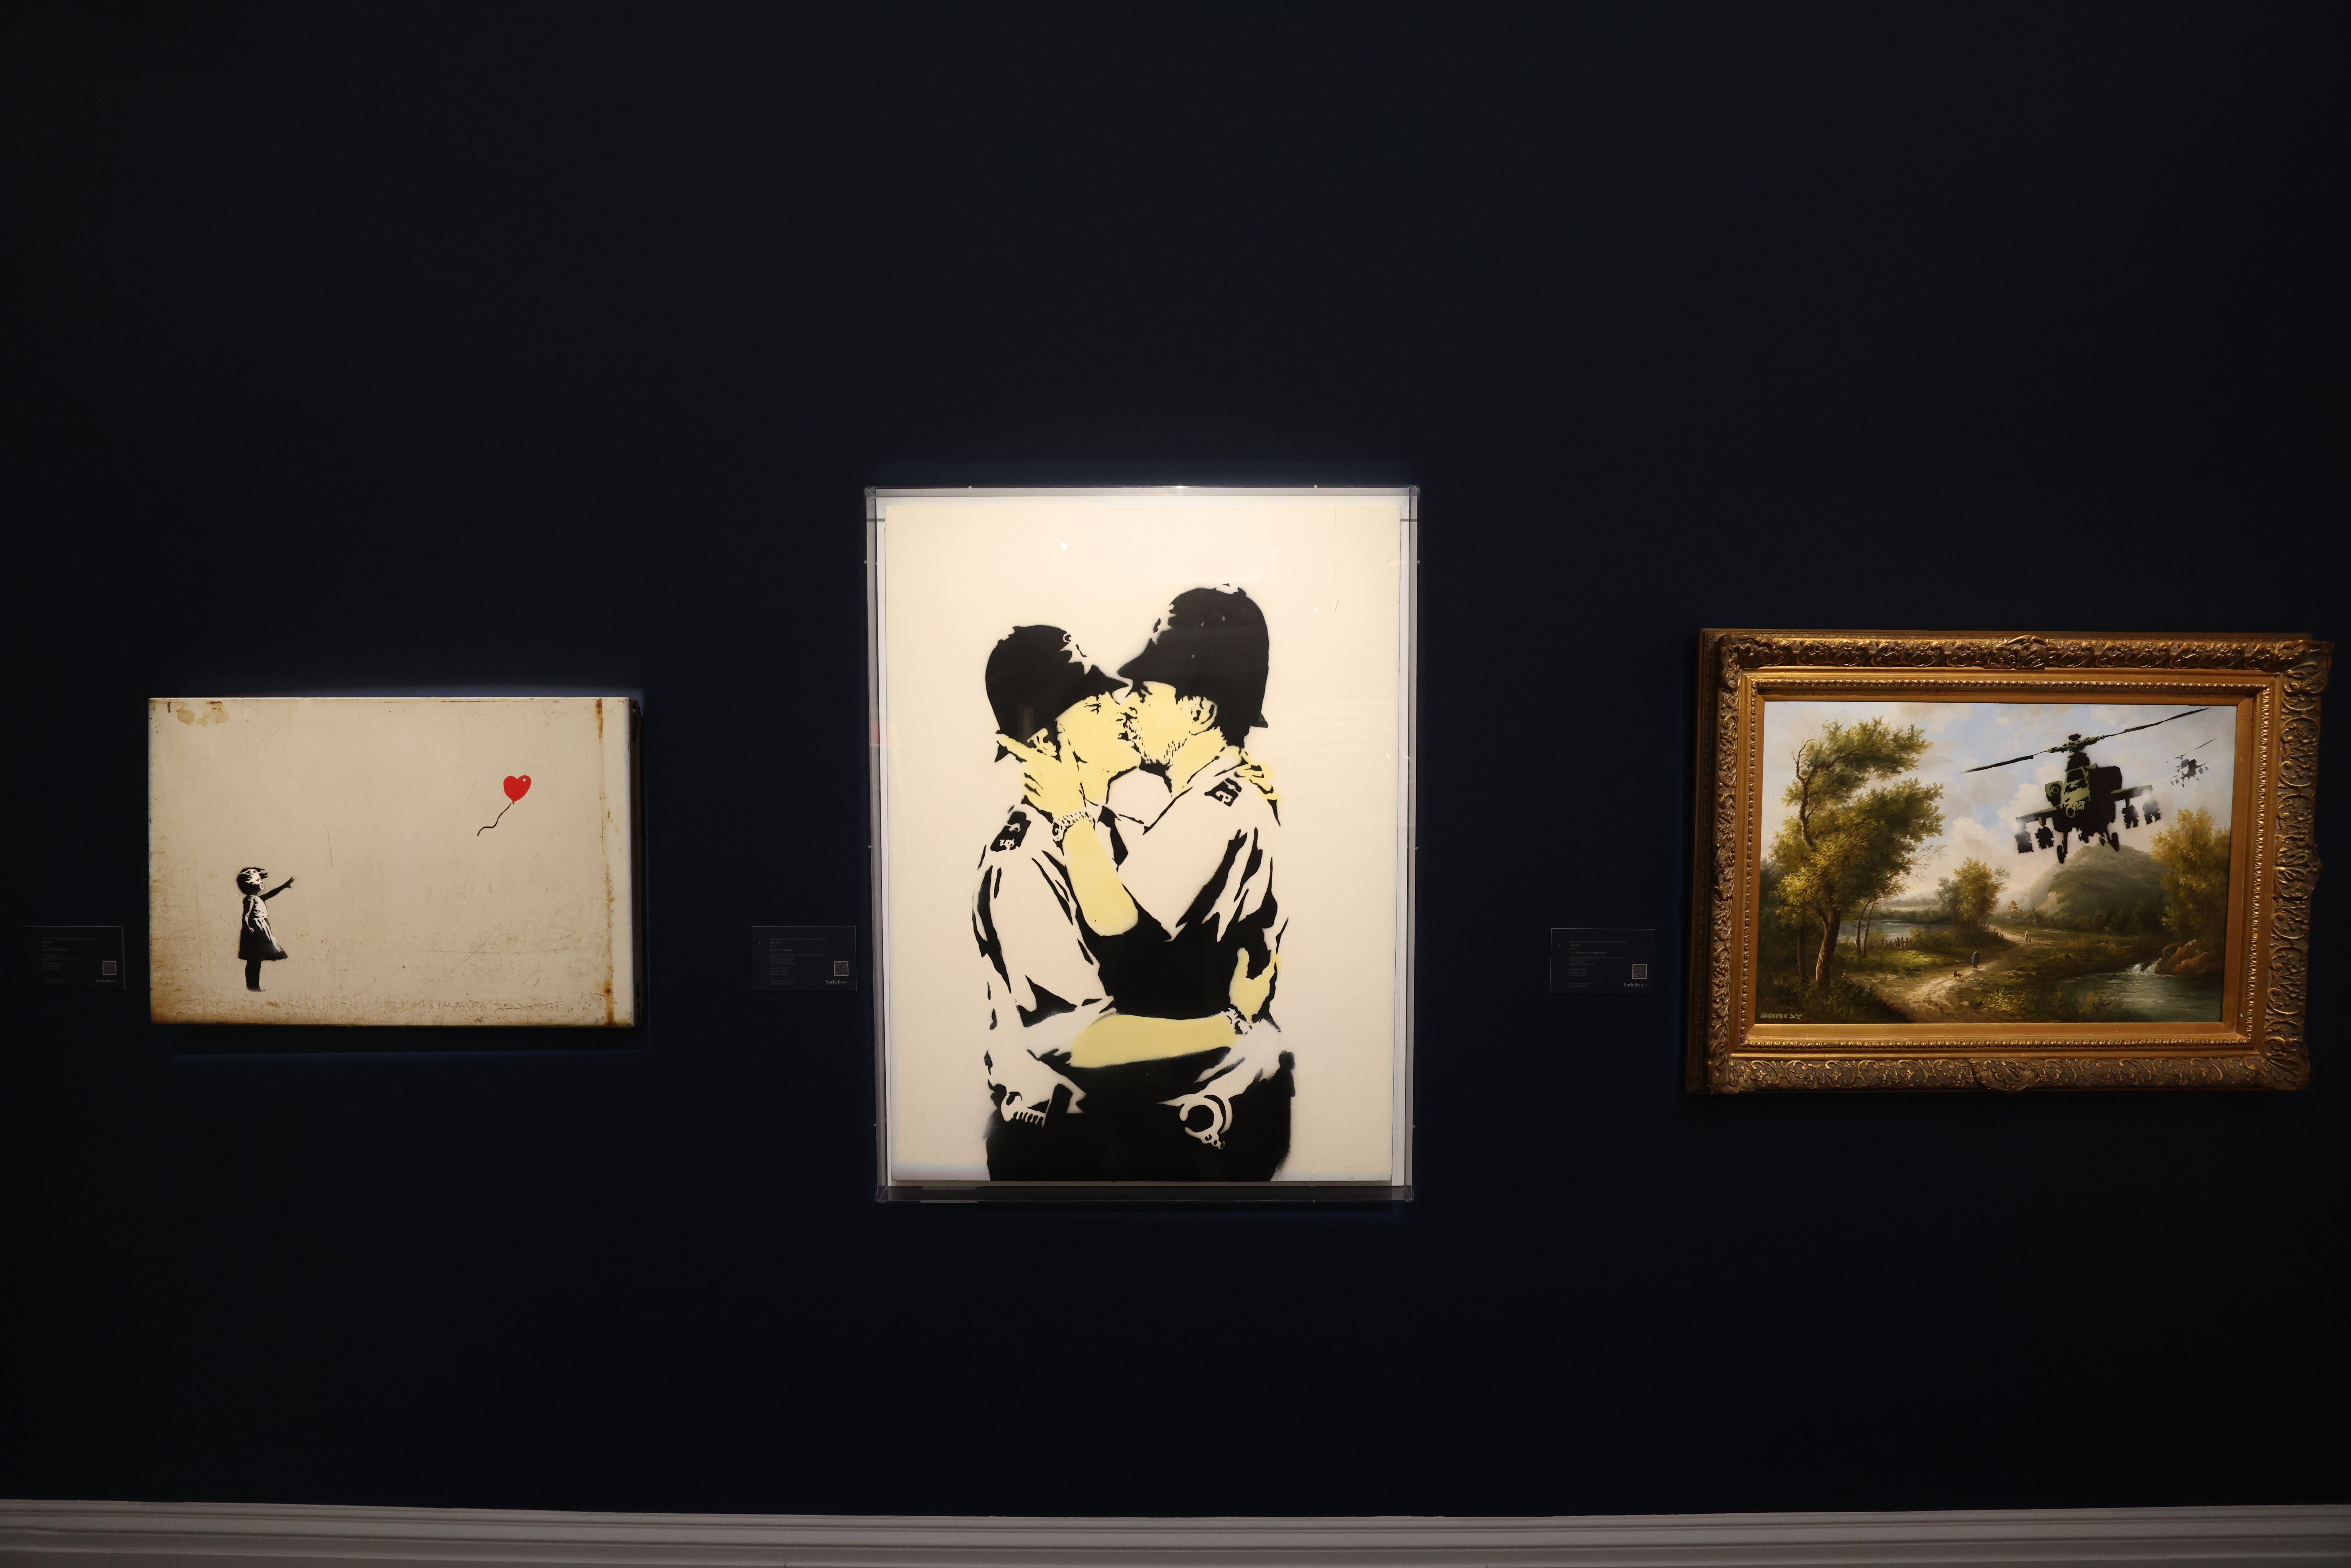 Artworks by Banksy from singer Robbie Williams’ personal collection are going under the hammer at Sotheby’s next month (James Manning/PA)